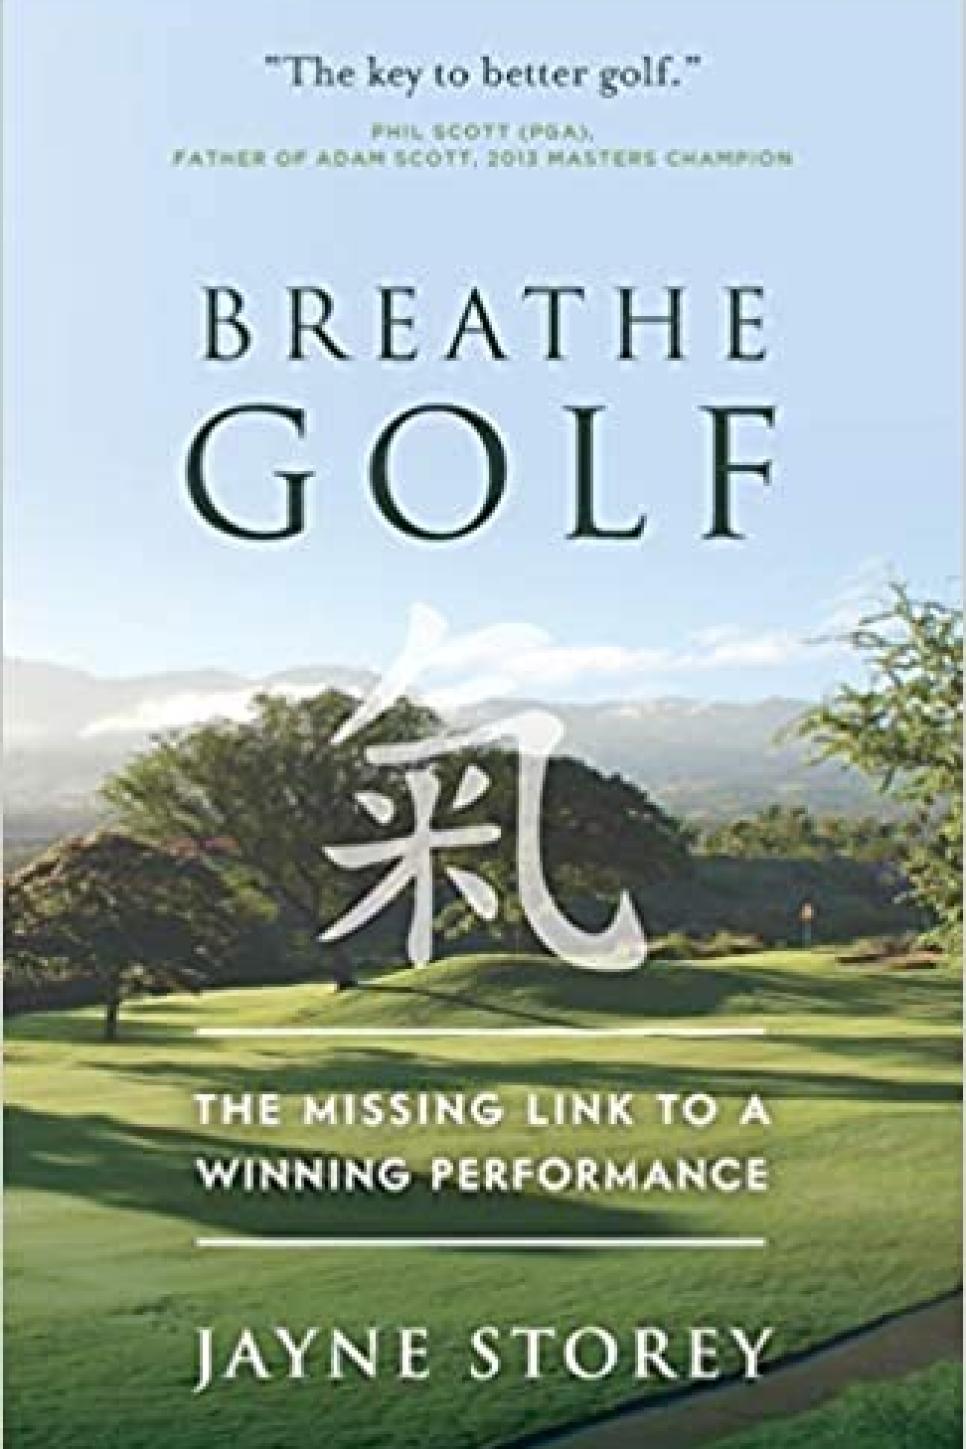 rx-amazonbreathe-golf-the-missing-link-to-a-winning-performance.jpeg